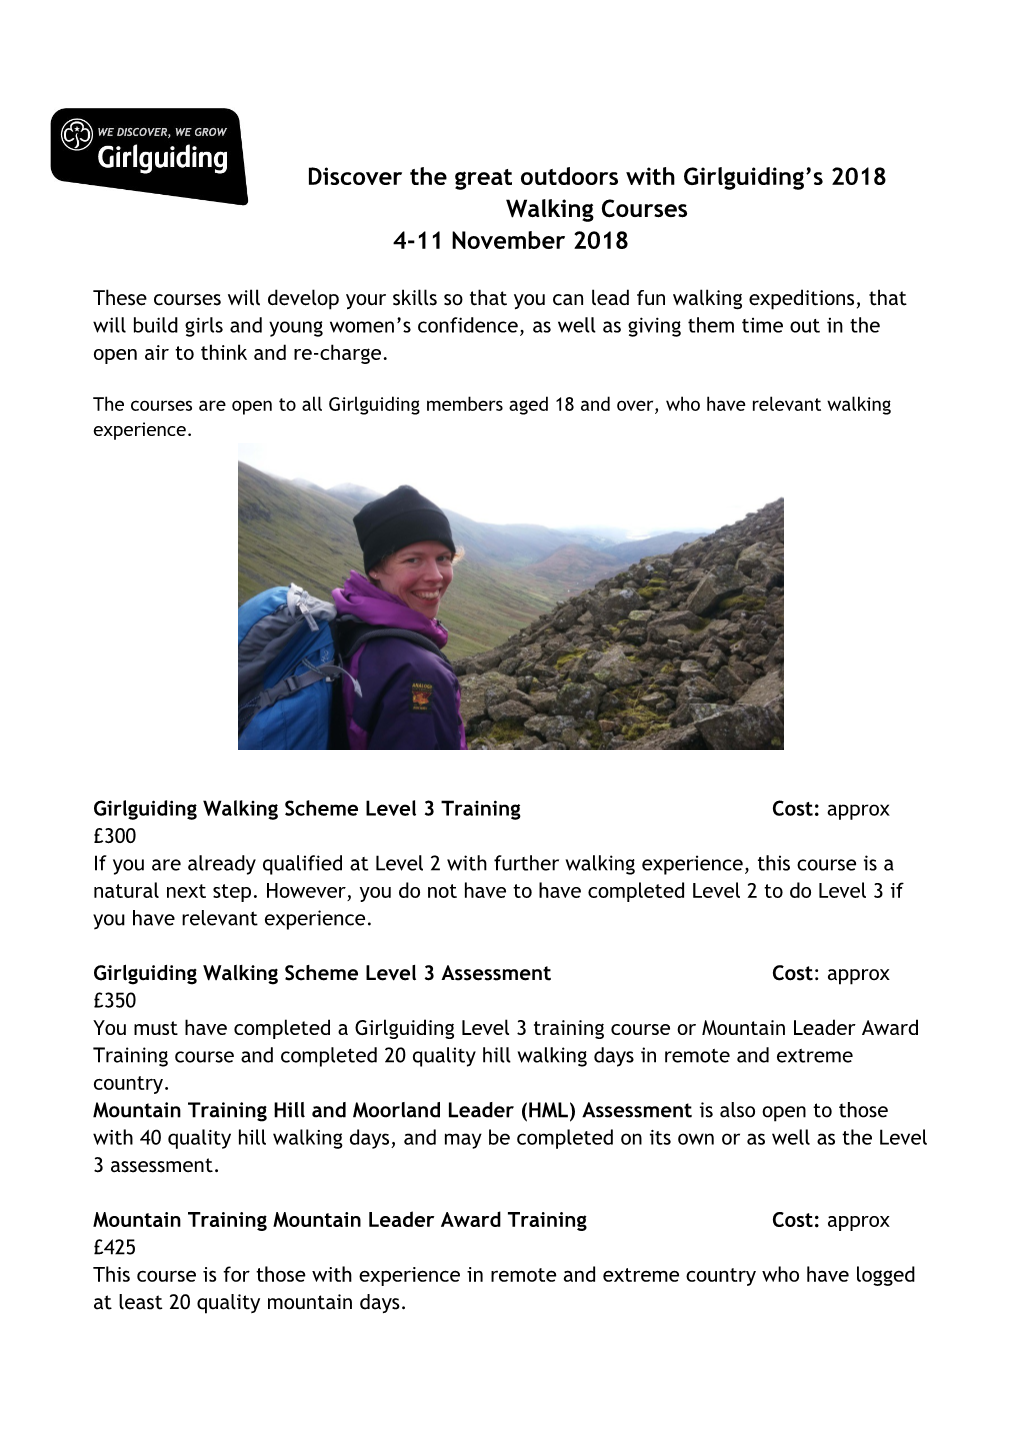 Discover the Great Outdoors with Girlguiding S 2018 Walking Courses